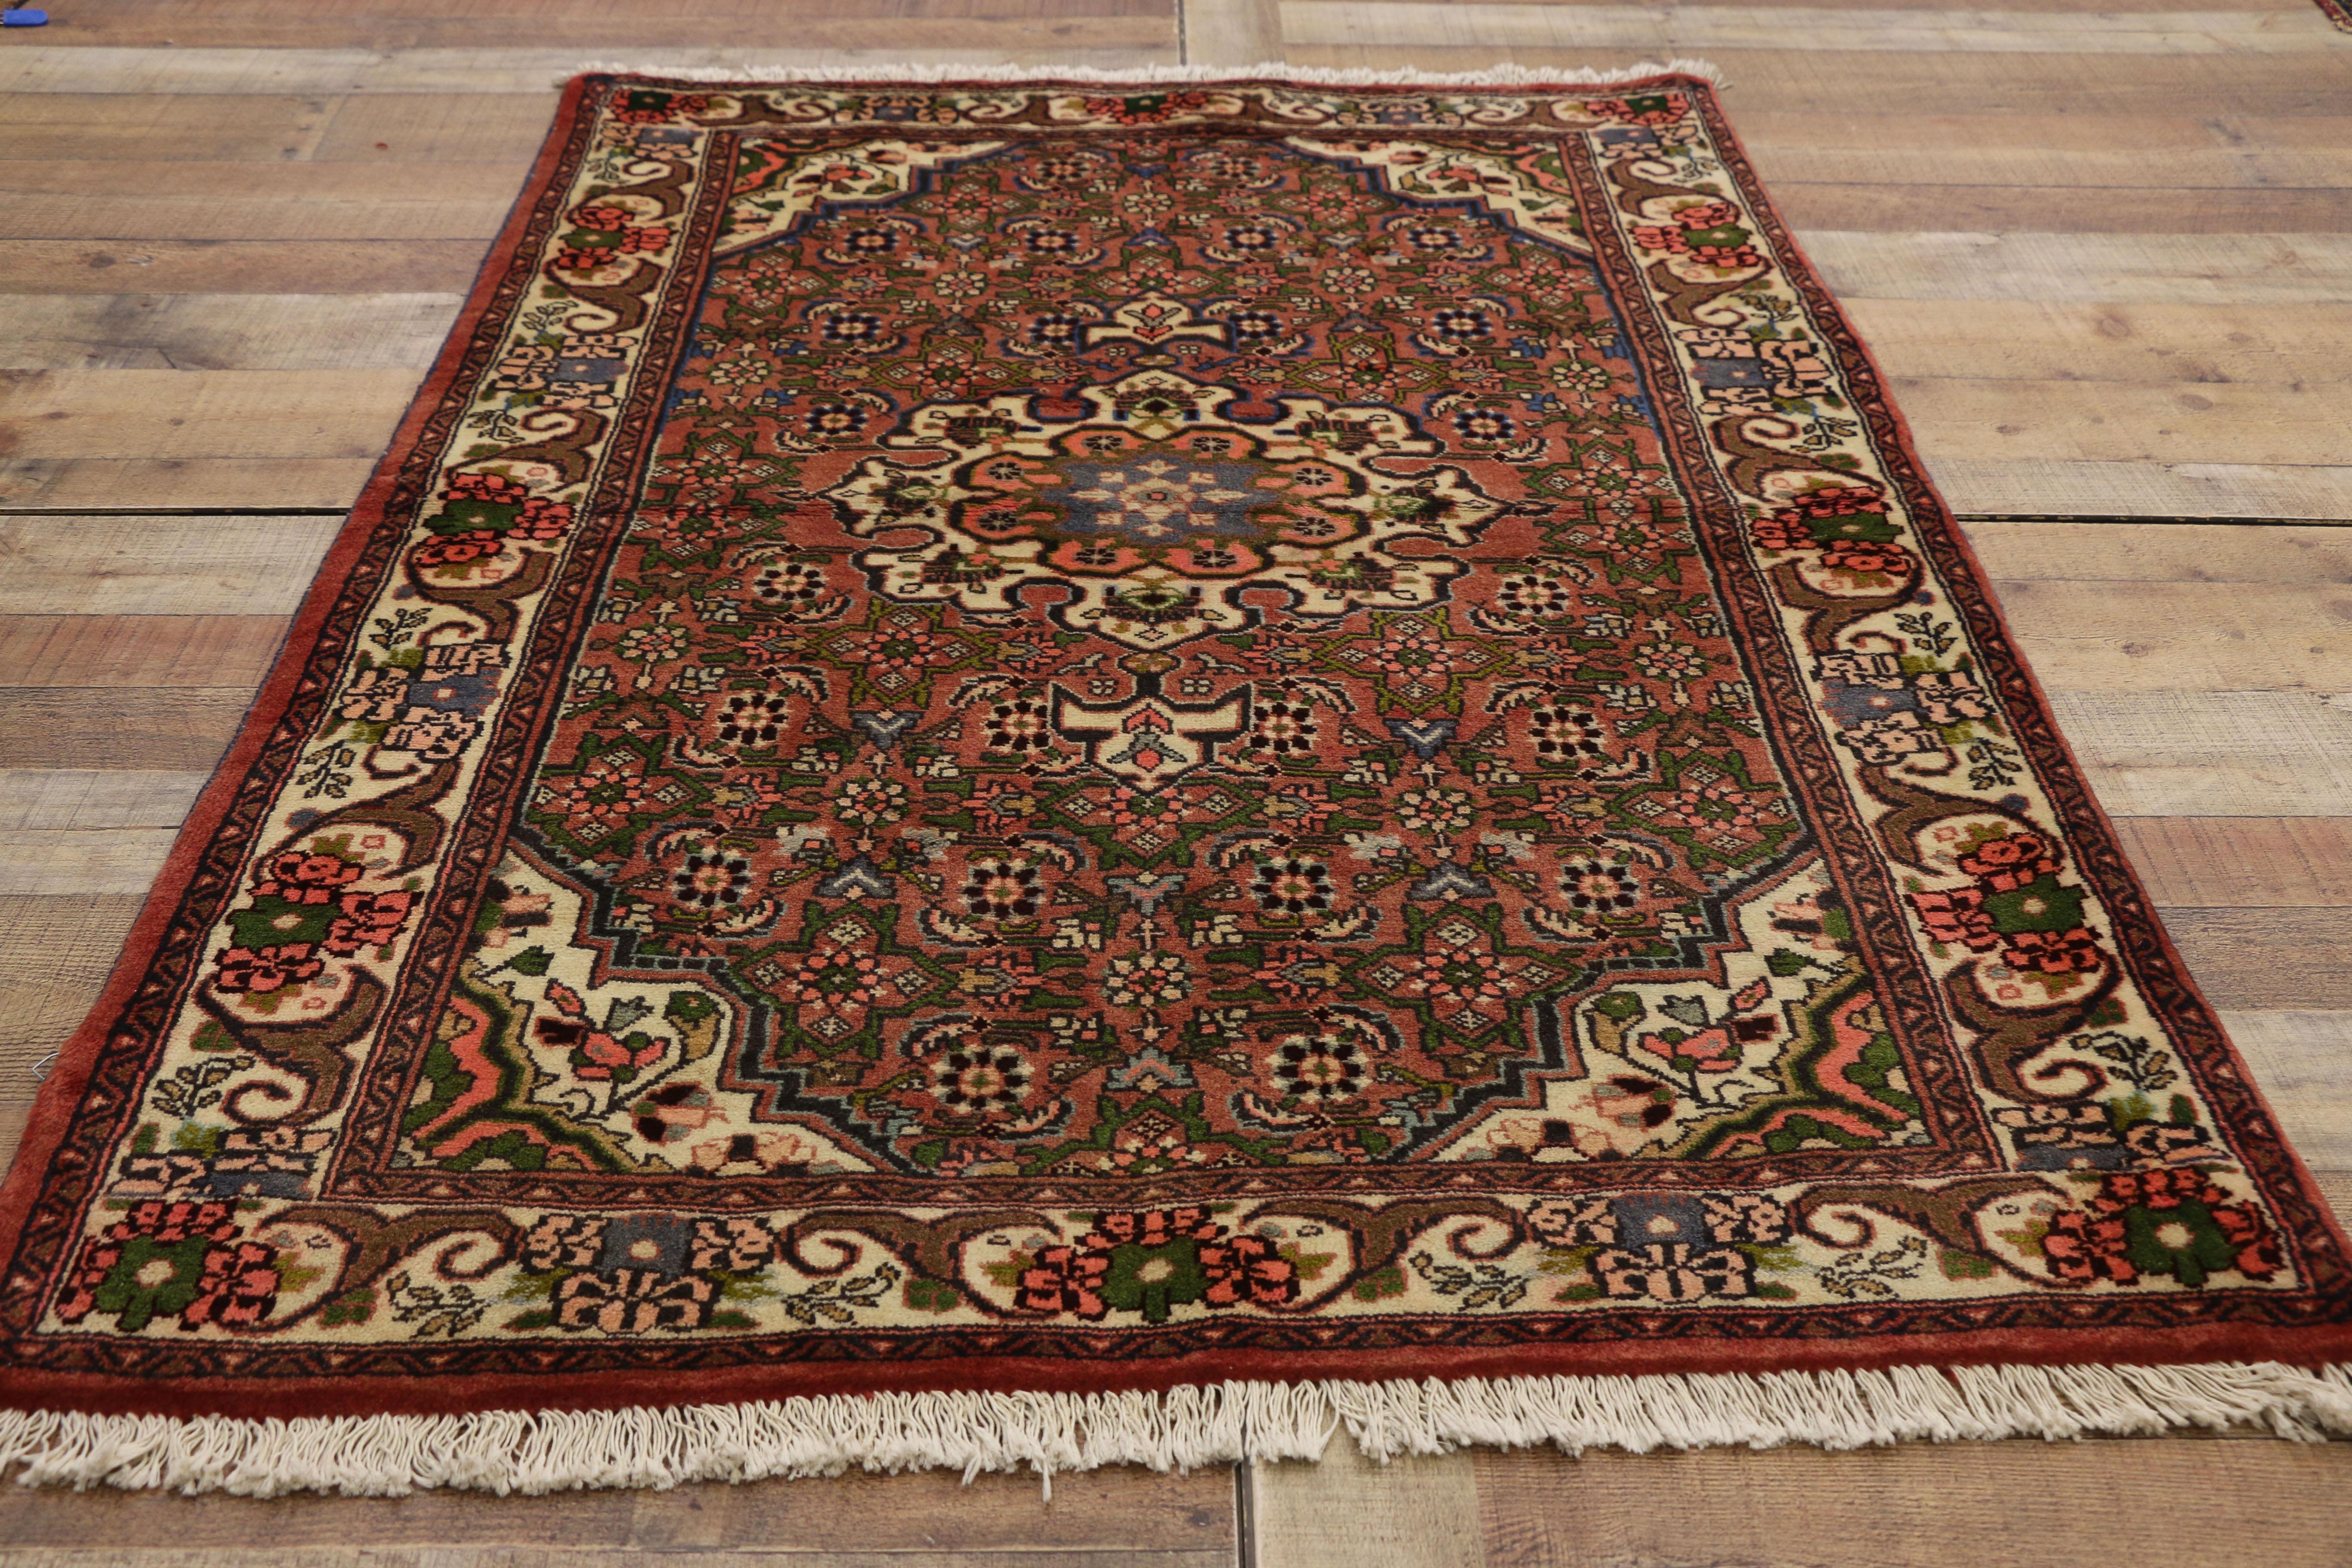 Wool Vintage Persian Borchelou Hamadan Rug, Entry or Foyer Rug For Sale